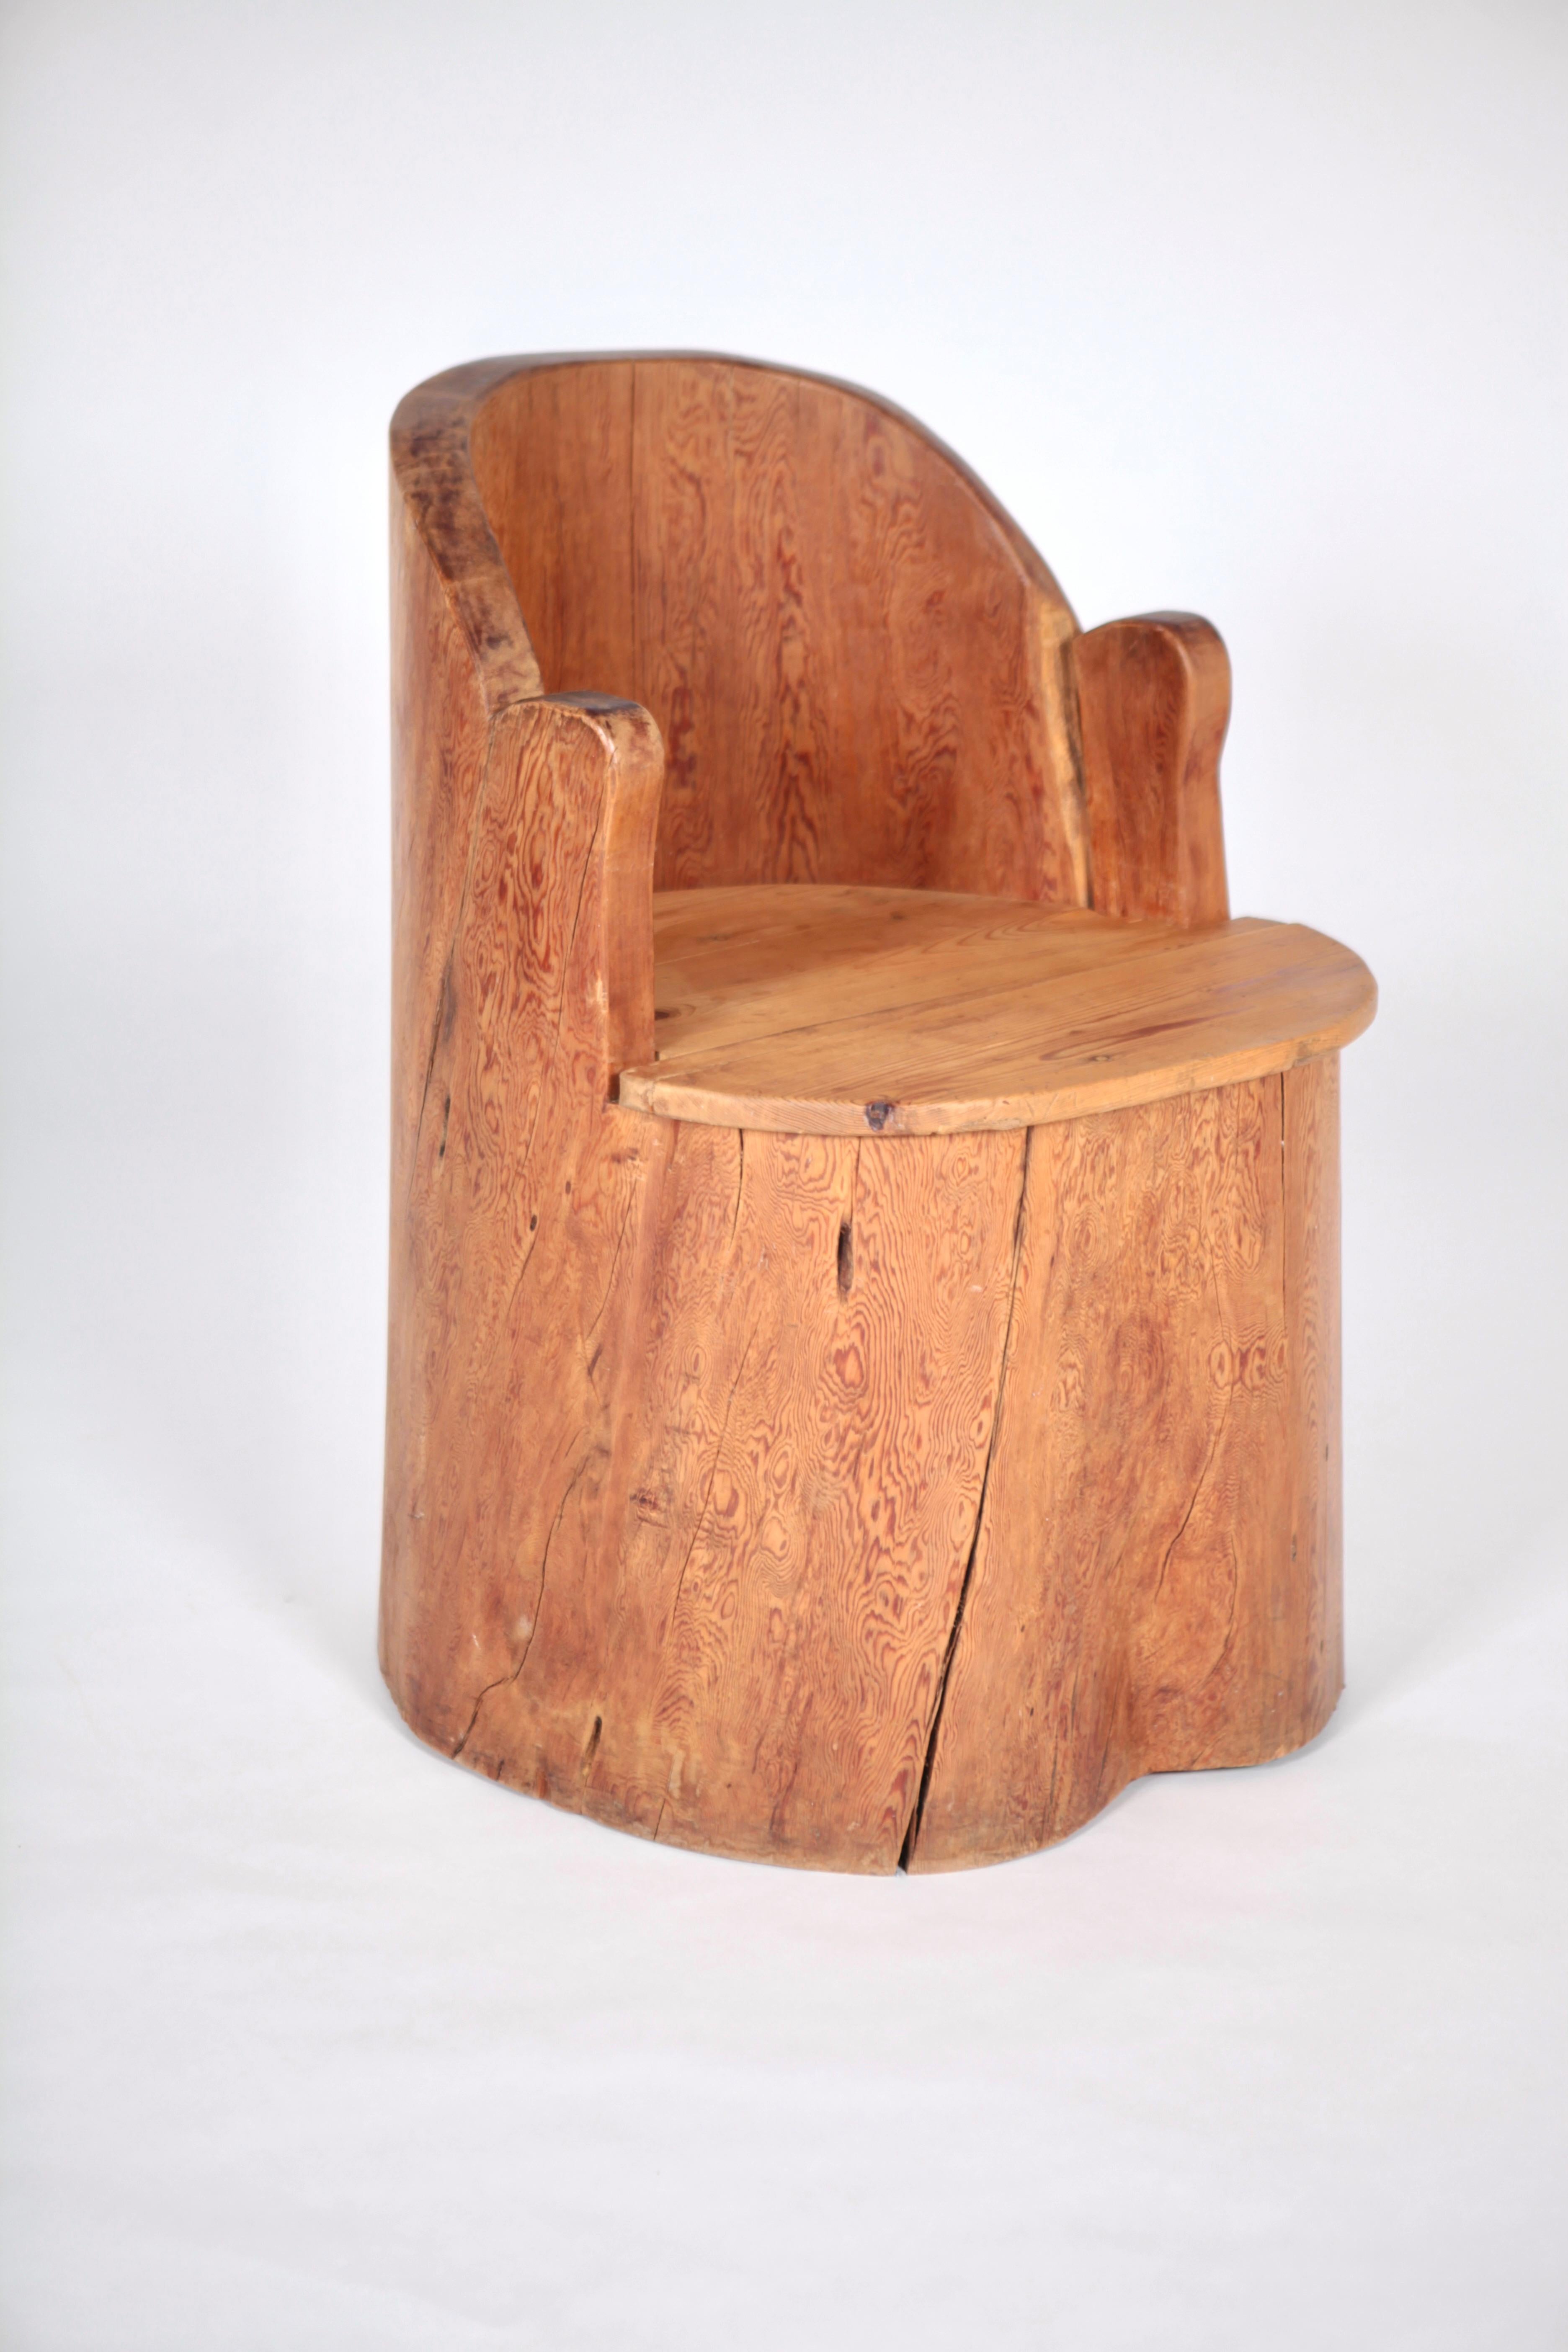 Stump Chair in Pine, Mora, Sweden 1930s. For Sale 1